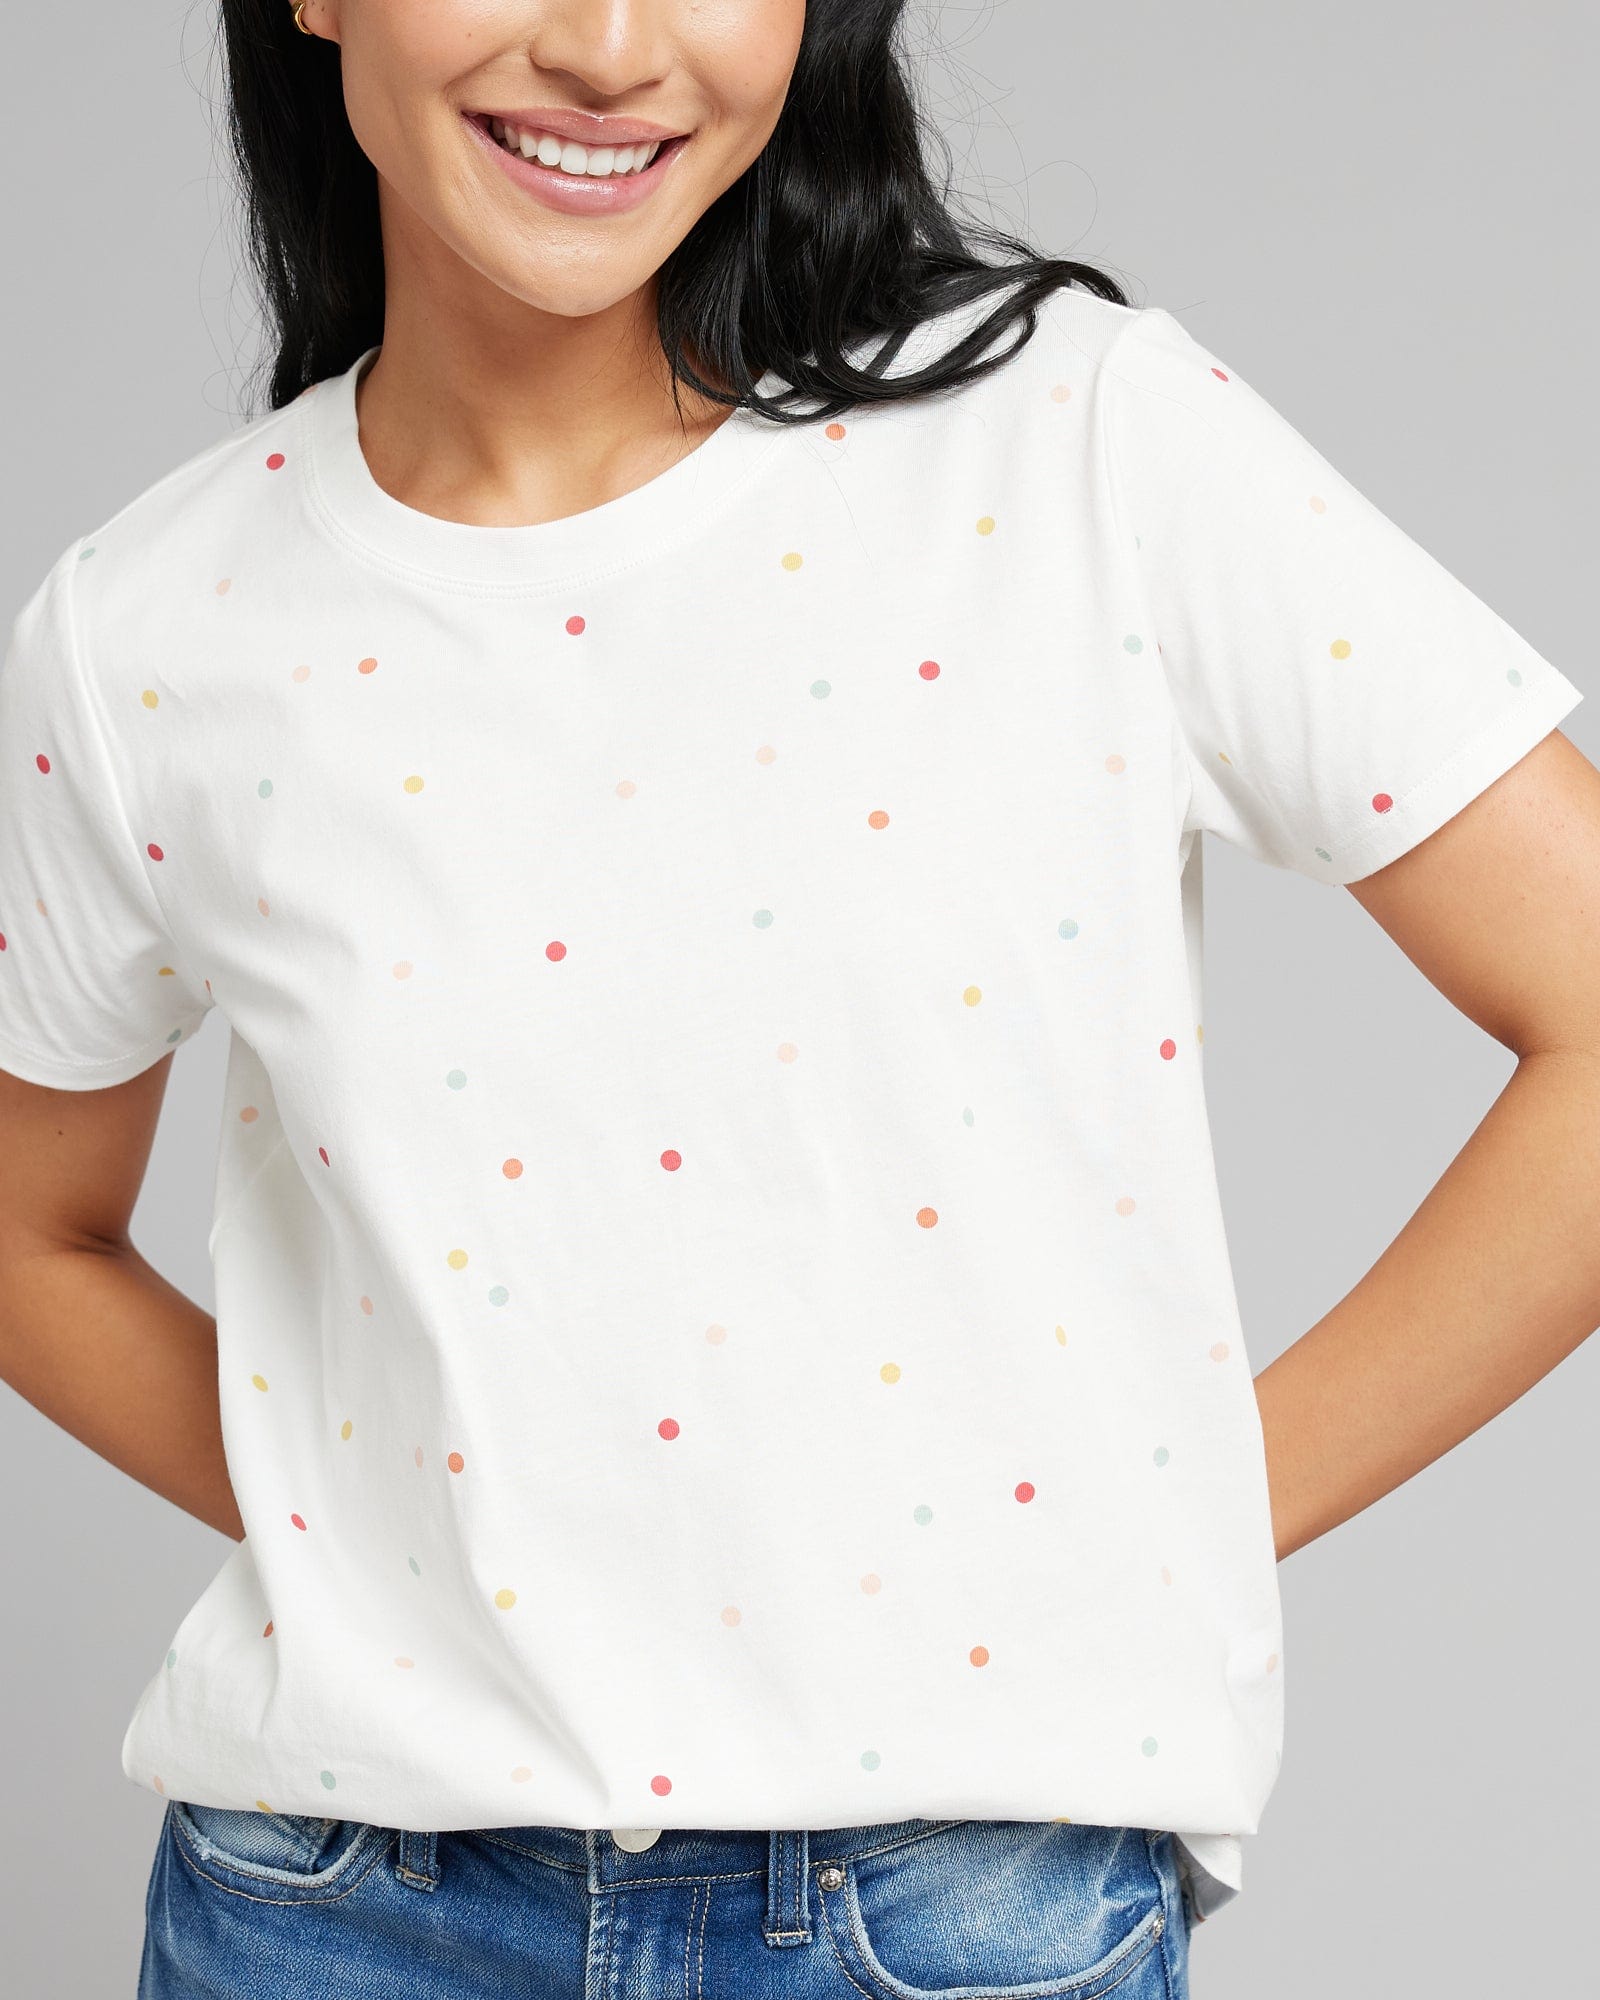 Woman in a white short sleeved t-shirt with polka dots